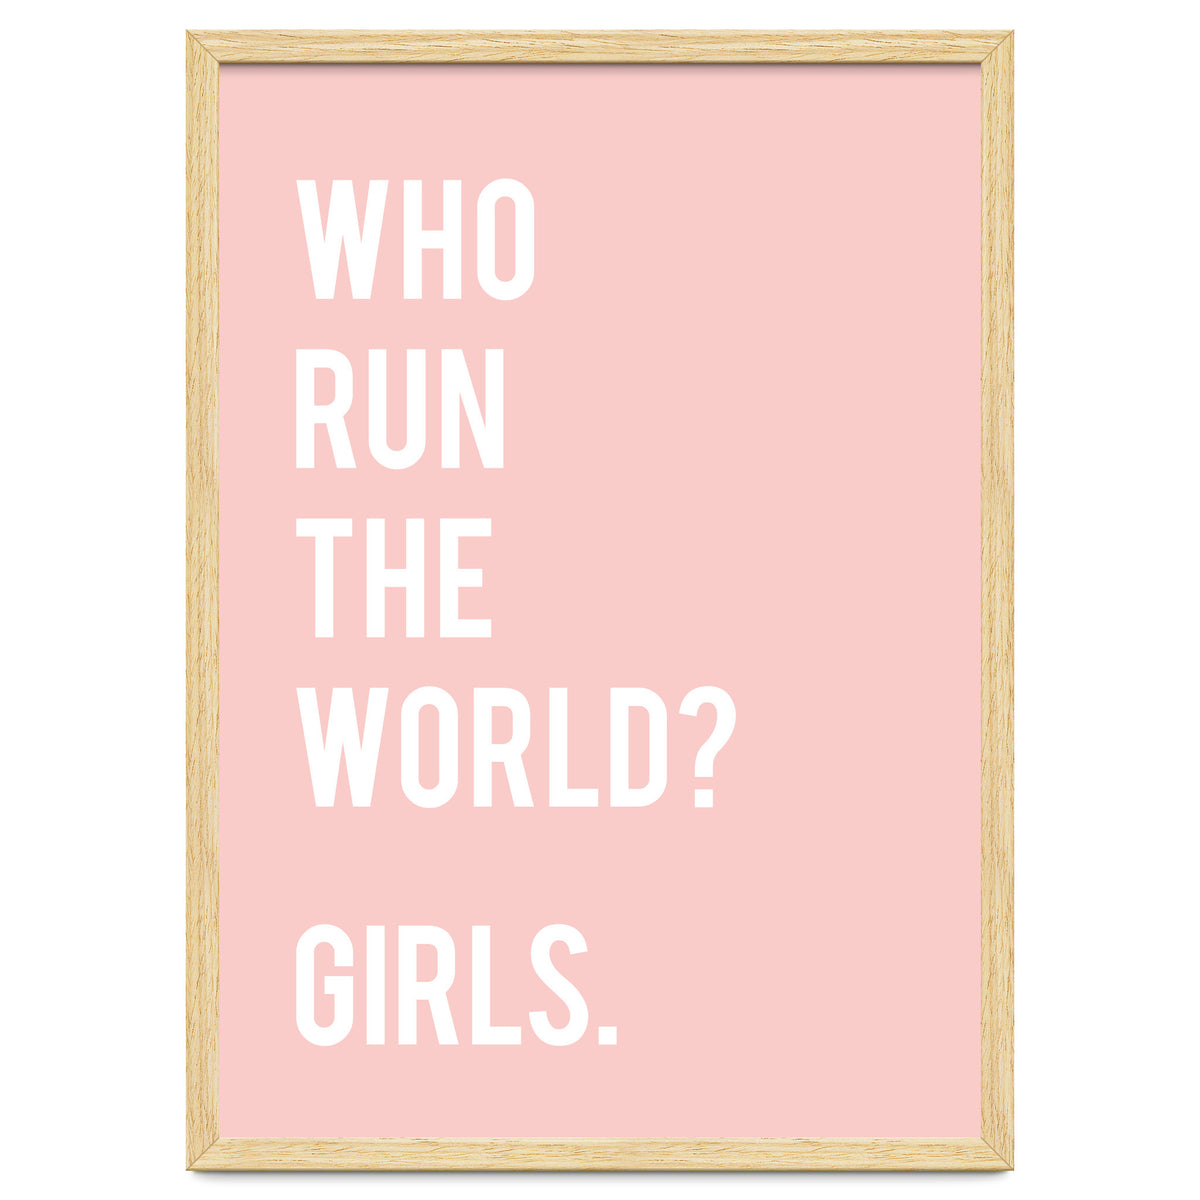 Who Run The World? Girls. (Print Only) Art Print by Pineapple Ink